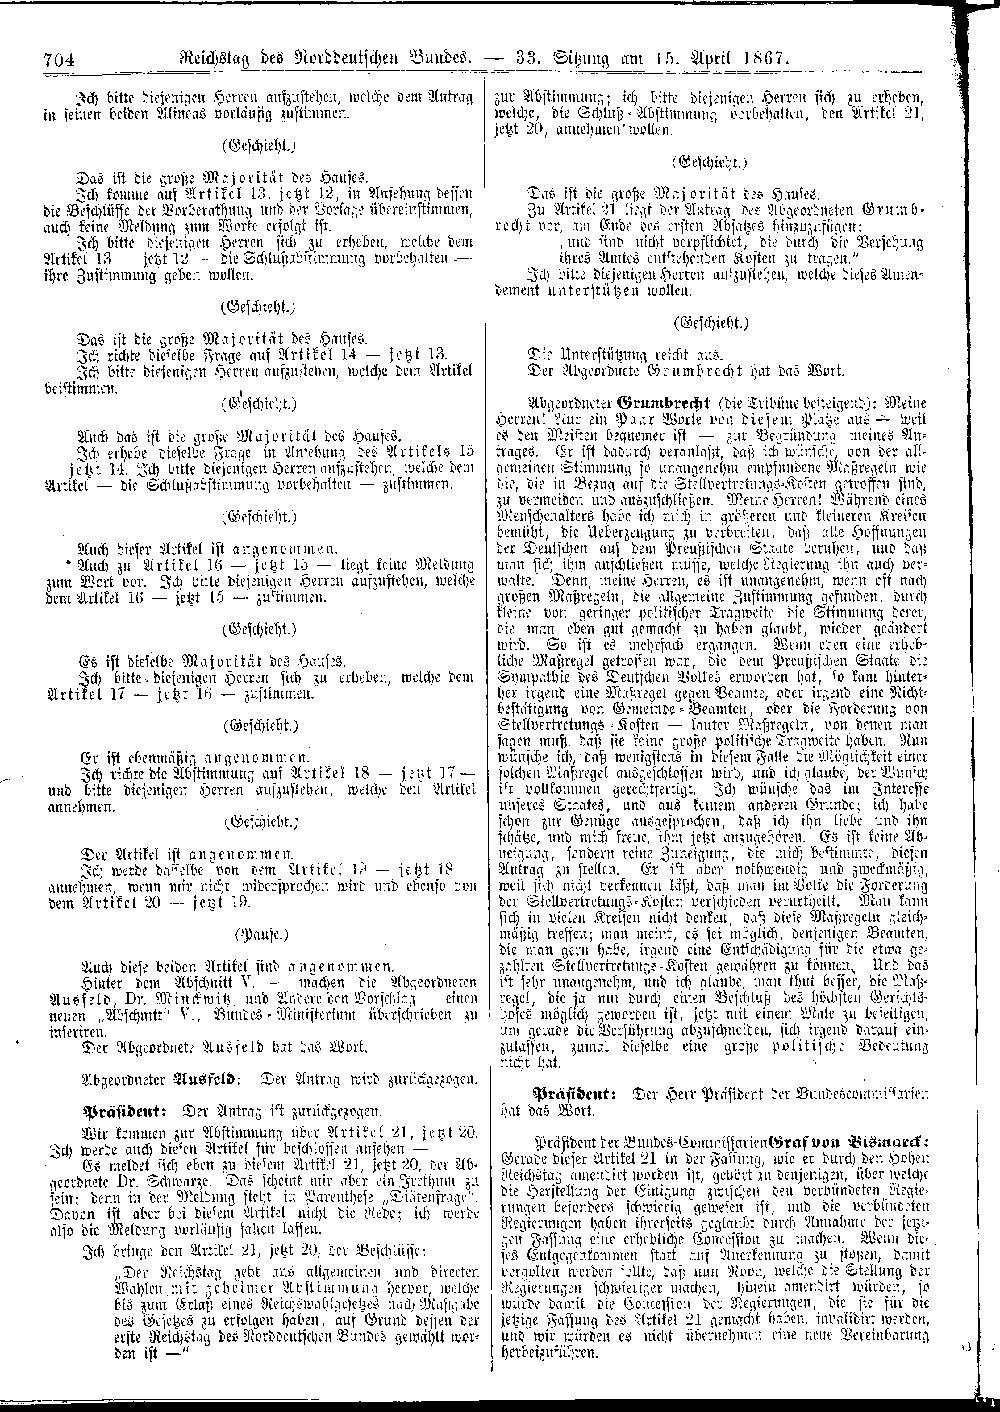 Scan of page 704